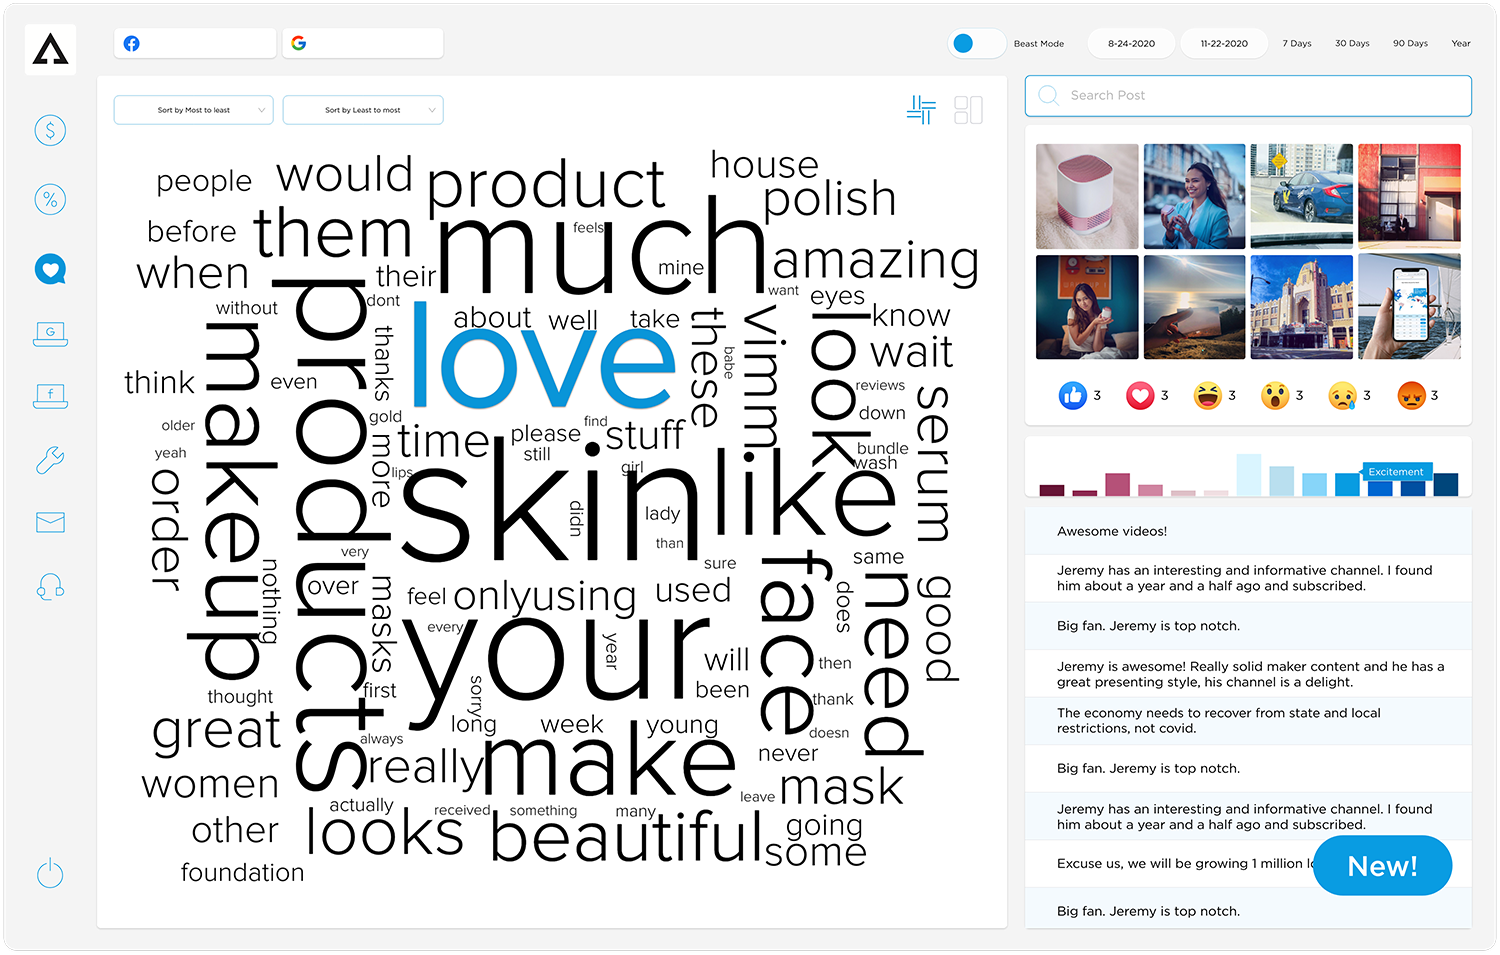 Aphrodite Software - Engagement Dashboard, providing insights into brand messaging & performance. Discover the ROAS and user sentiments generated by your social media posts.